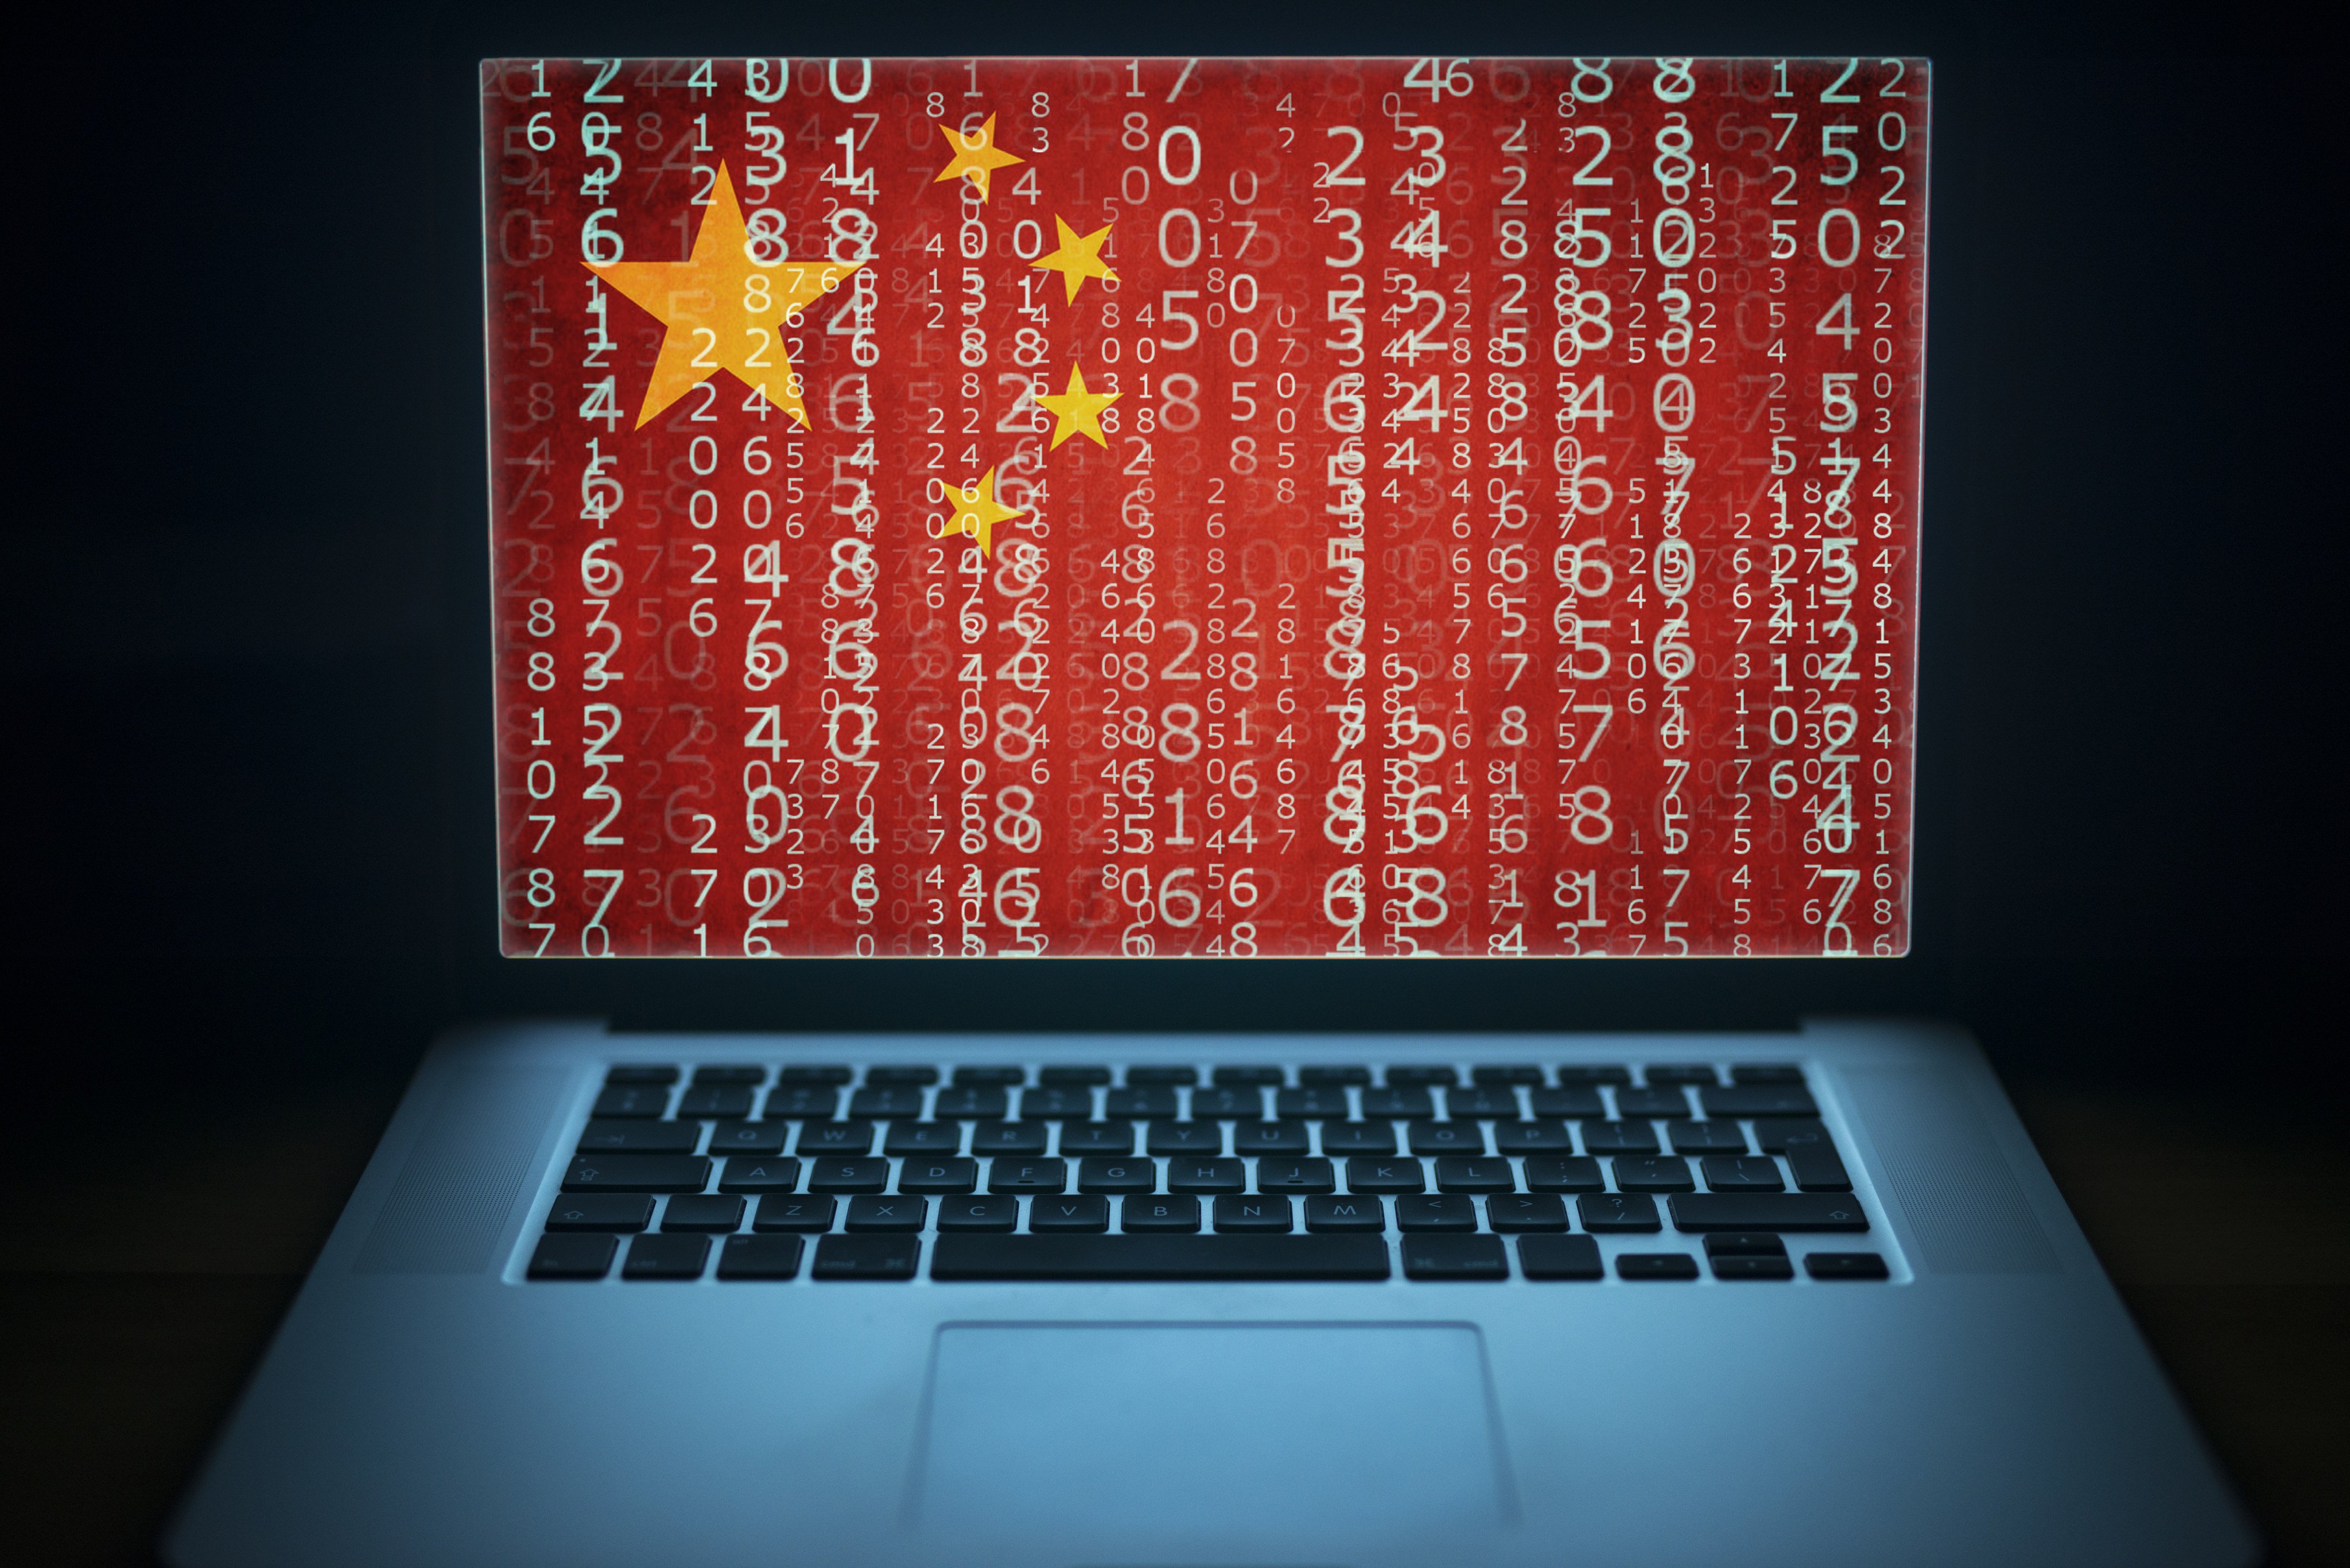 Cybersecurity expert Qi Xiangdong says Western countries have a natural advantage in collecting intelligence about vulnerabilities to cyberattacks.
Photo: Shutterstock 